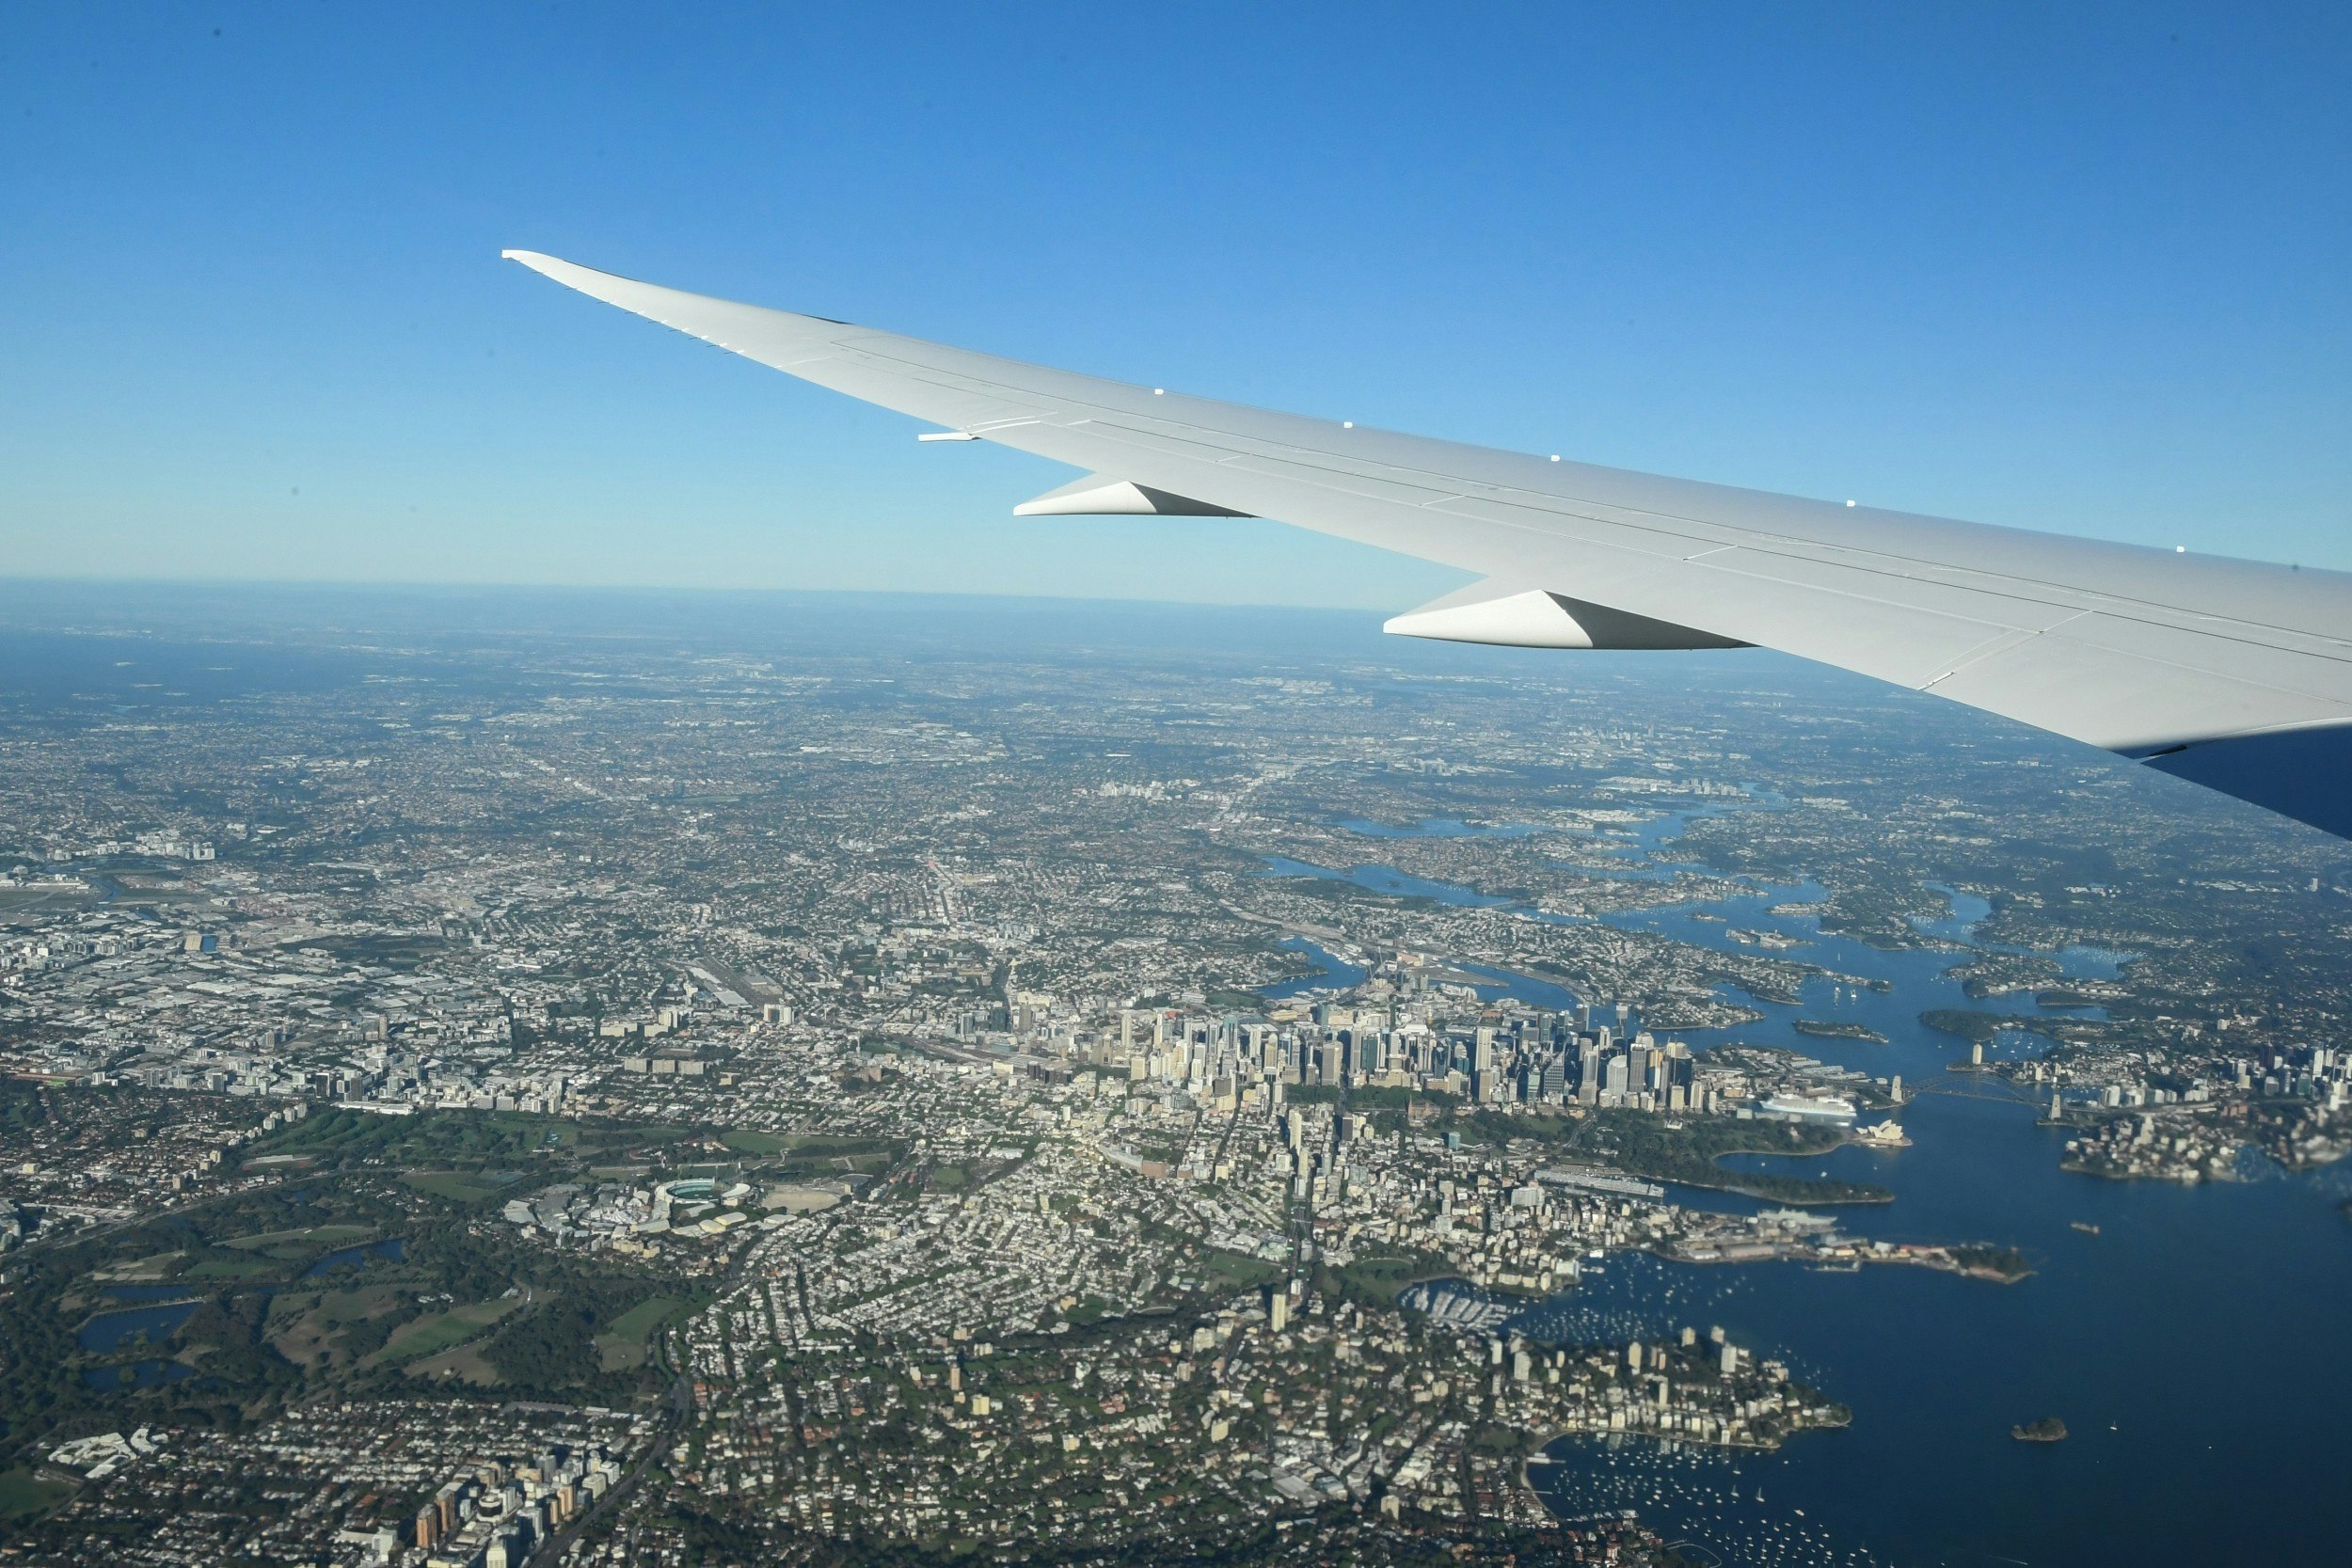 The view from the window of the non-stop Qantas flight from New York to Sydney